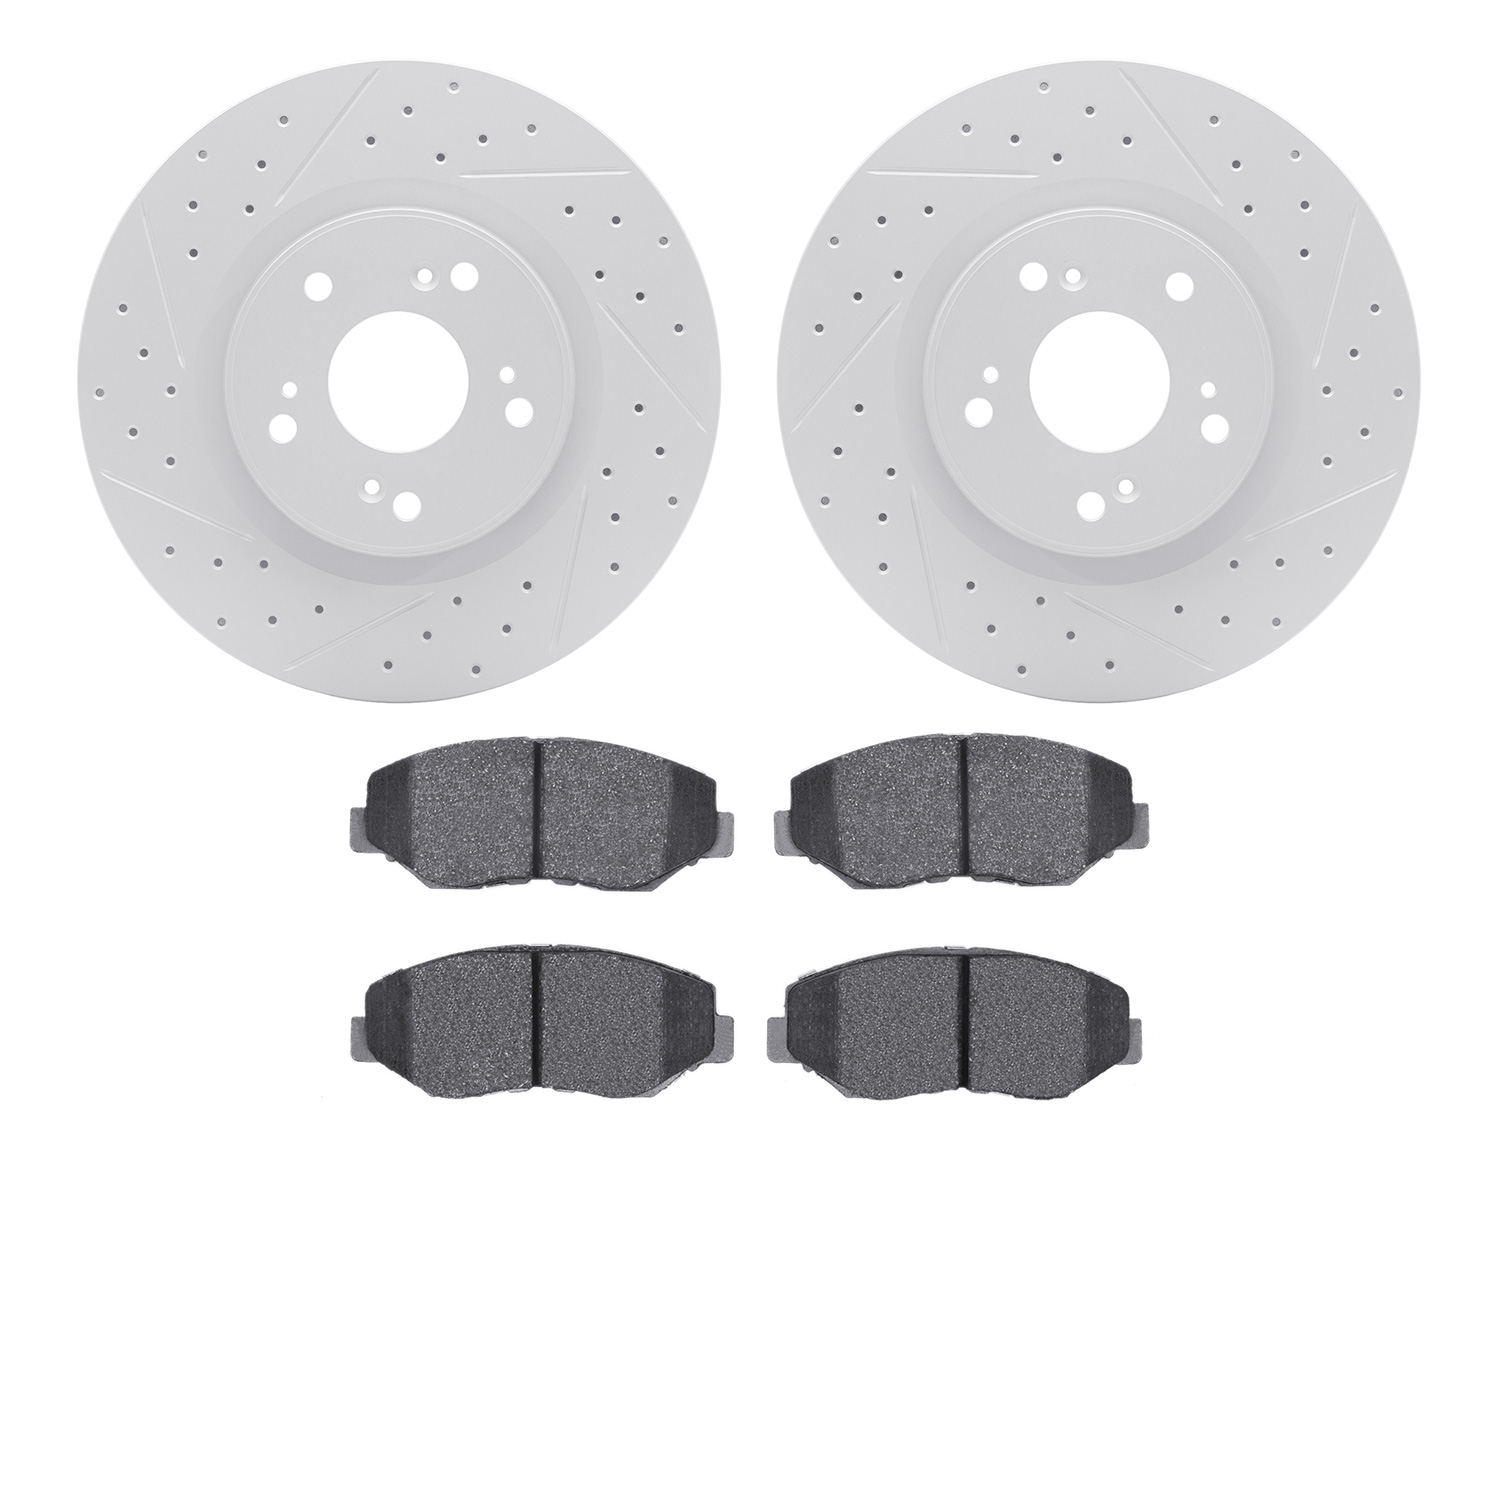 2502-59079 Geoperformance Drilled/Slotted Rotors w/5000 Advanced Brake Pads Kit, 2012-2016 Acura/Honda, Position: Front